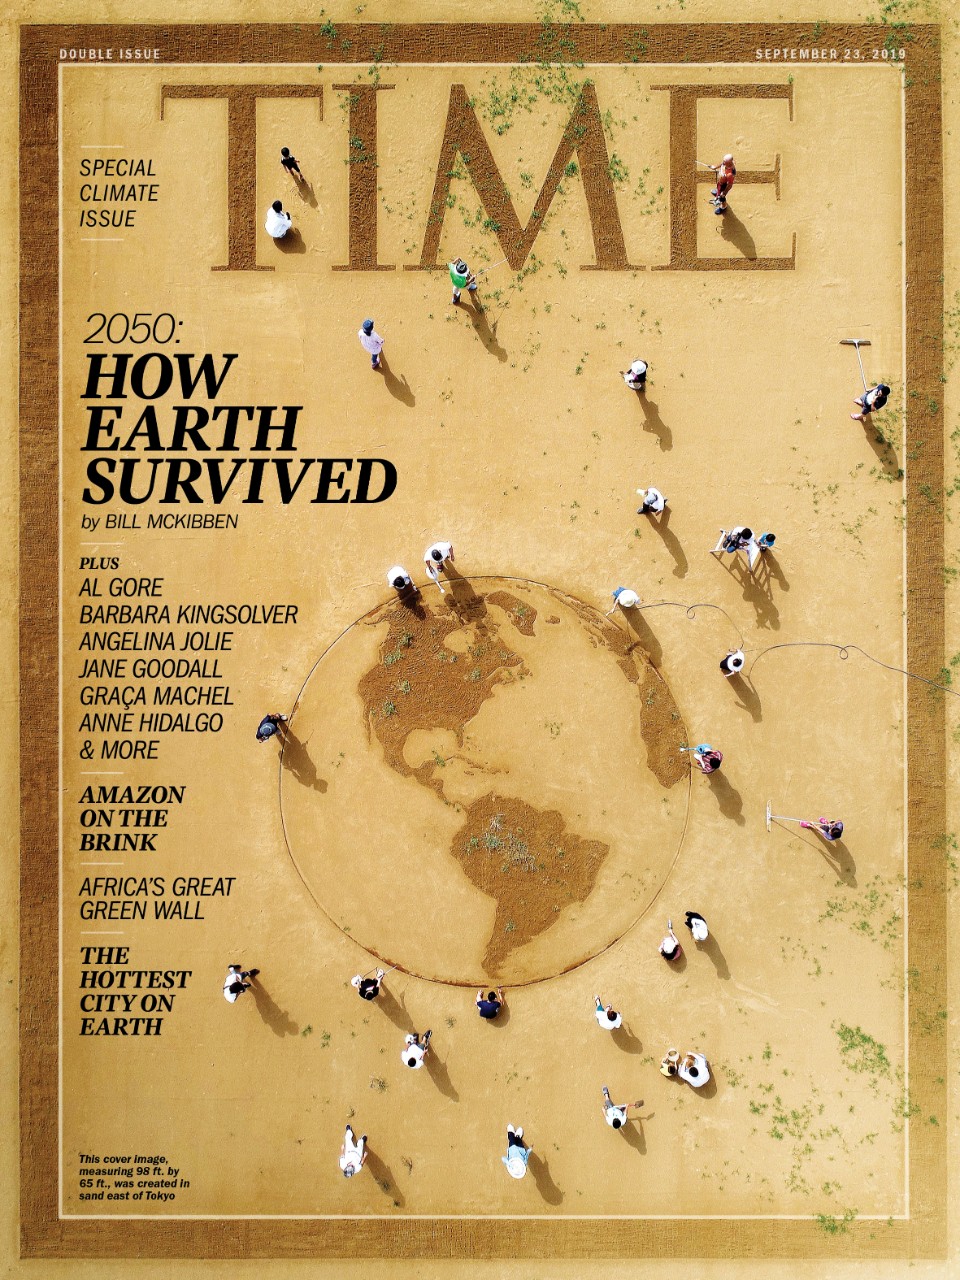 TIME magazine cover highlighting climate change, titled "2050: How Earth Survived," showing a small number of people against a desert landscape with sand painting in the shape of the Earth and the TIME logo and border